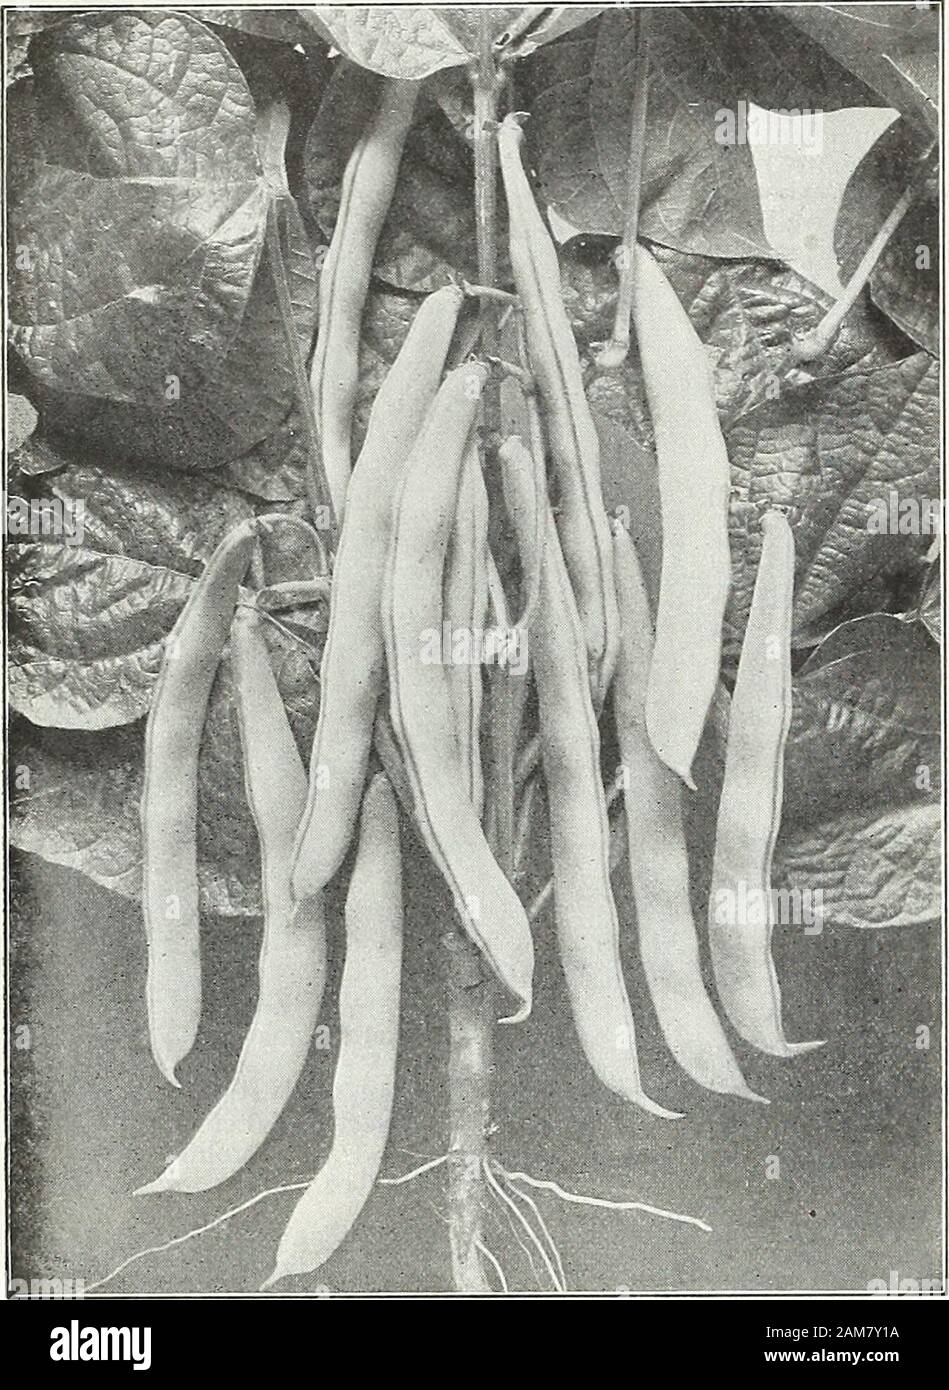 Farquhar's garden annual : 1922 . 10 R. & J. FARQUHAR COMPANY, BOSTON. VEGETABLE SEEDS. BEANS, DWARF OR BUSH. fh^oUs, (Sp). Bean, Farquhars Rustless Golden Wax. Farquhars Stringless White Wax. a large, white seeded variety, of strong growiih, remarkably free fromstring and very tender. Pt., 40 cts.; qt., 75 cts. New Kidney Wax. An early vigorous variety, bear-ing a great profusion of long and extremely succulent pods.Pt., 40 cts.; qt., 75 cts.; 4 qts., $2.75. All prices in this Catalogue are subject to change withoutnotice, owing to the fluctuations of the market. Packets of all varieties of b Stock Photo